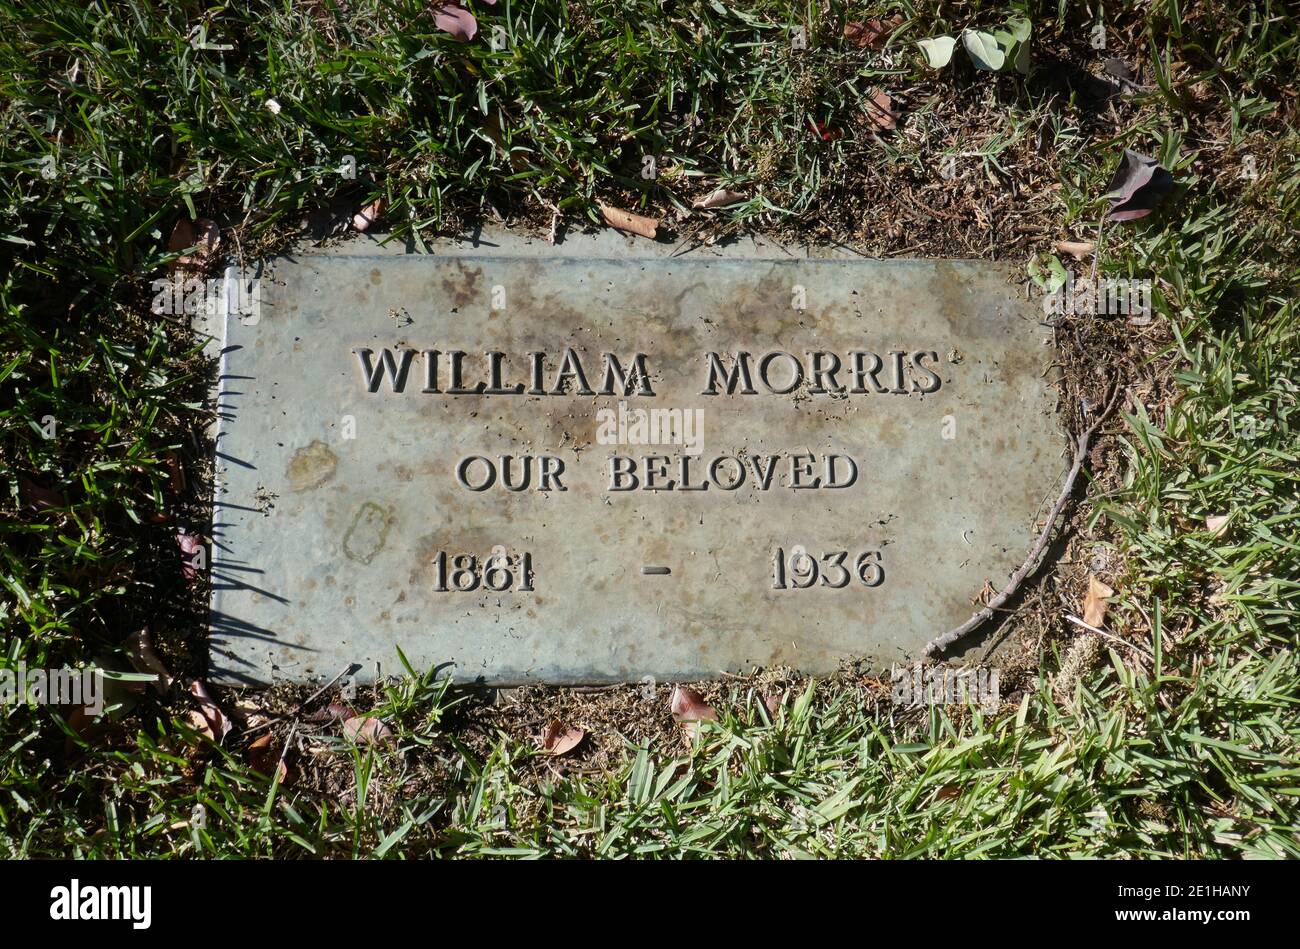 Los Angeles, California, USA 30th December 2020 A general view of atmosphere of actor William Morris Grave at Hollywood Forever Cemetery on December 30, 2020 in Los Angeles, California, USA. Photo by Barry King/Alamy Stock Photo Stock Photo